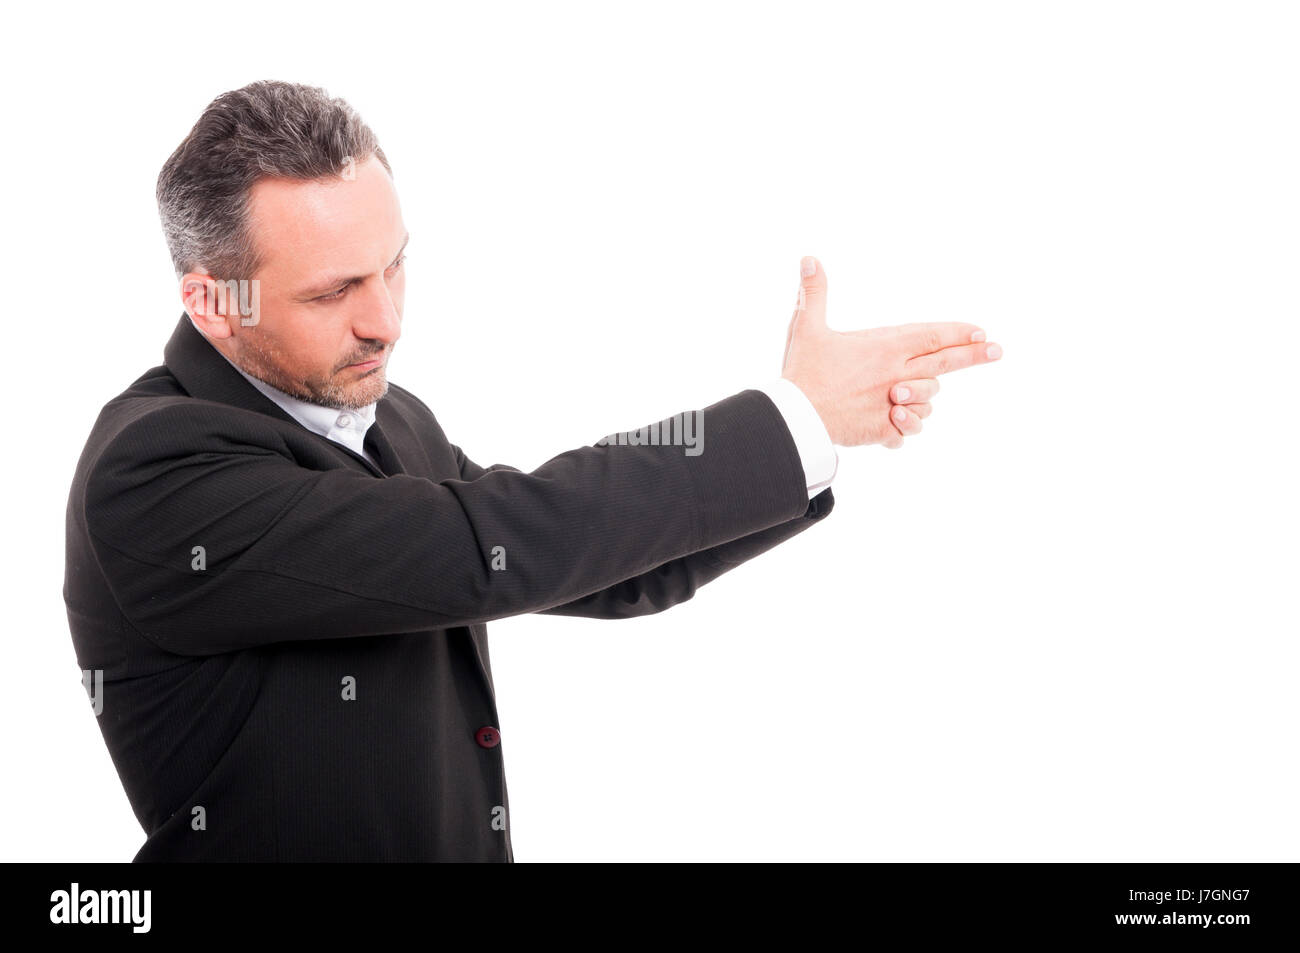 Secret agent taking aim with his hand and doing a gun gesture isolated on white Stock Photo